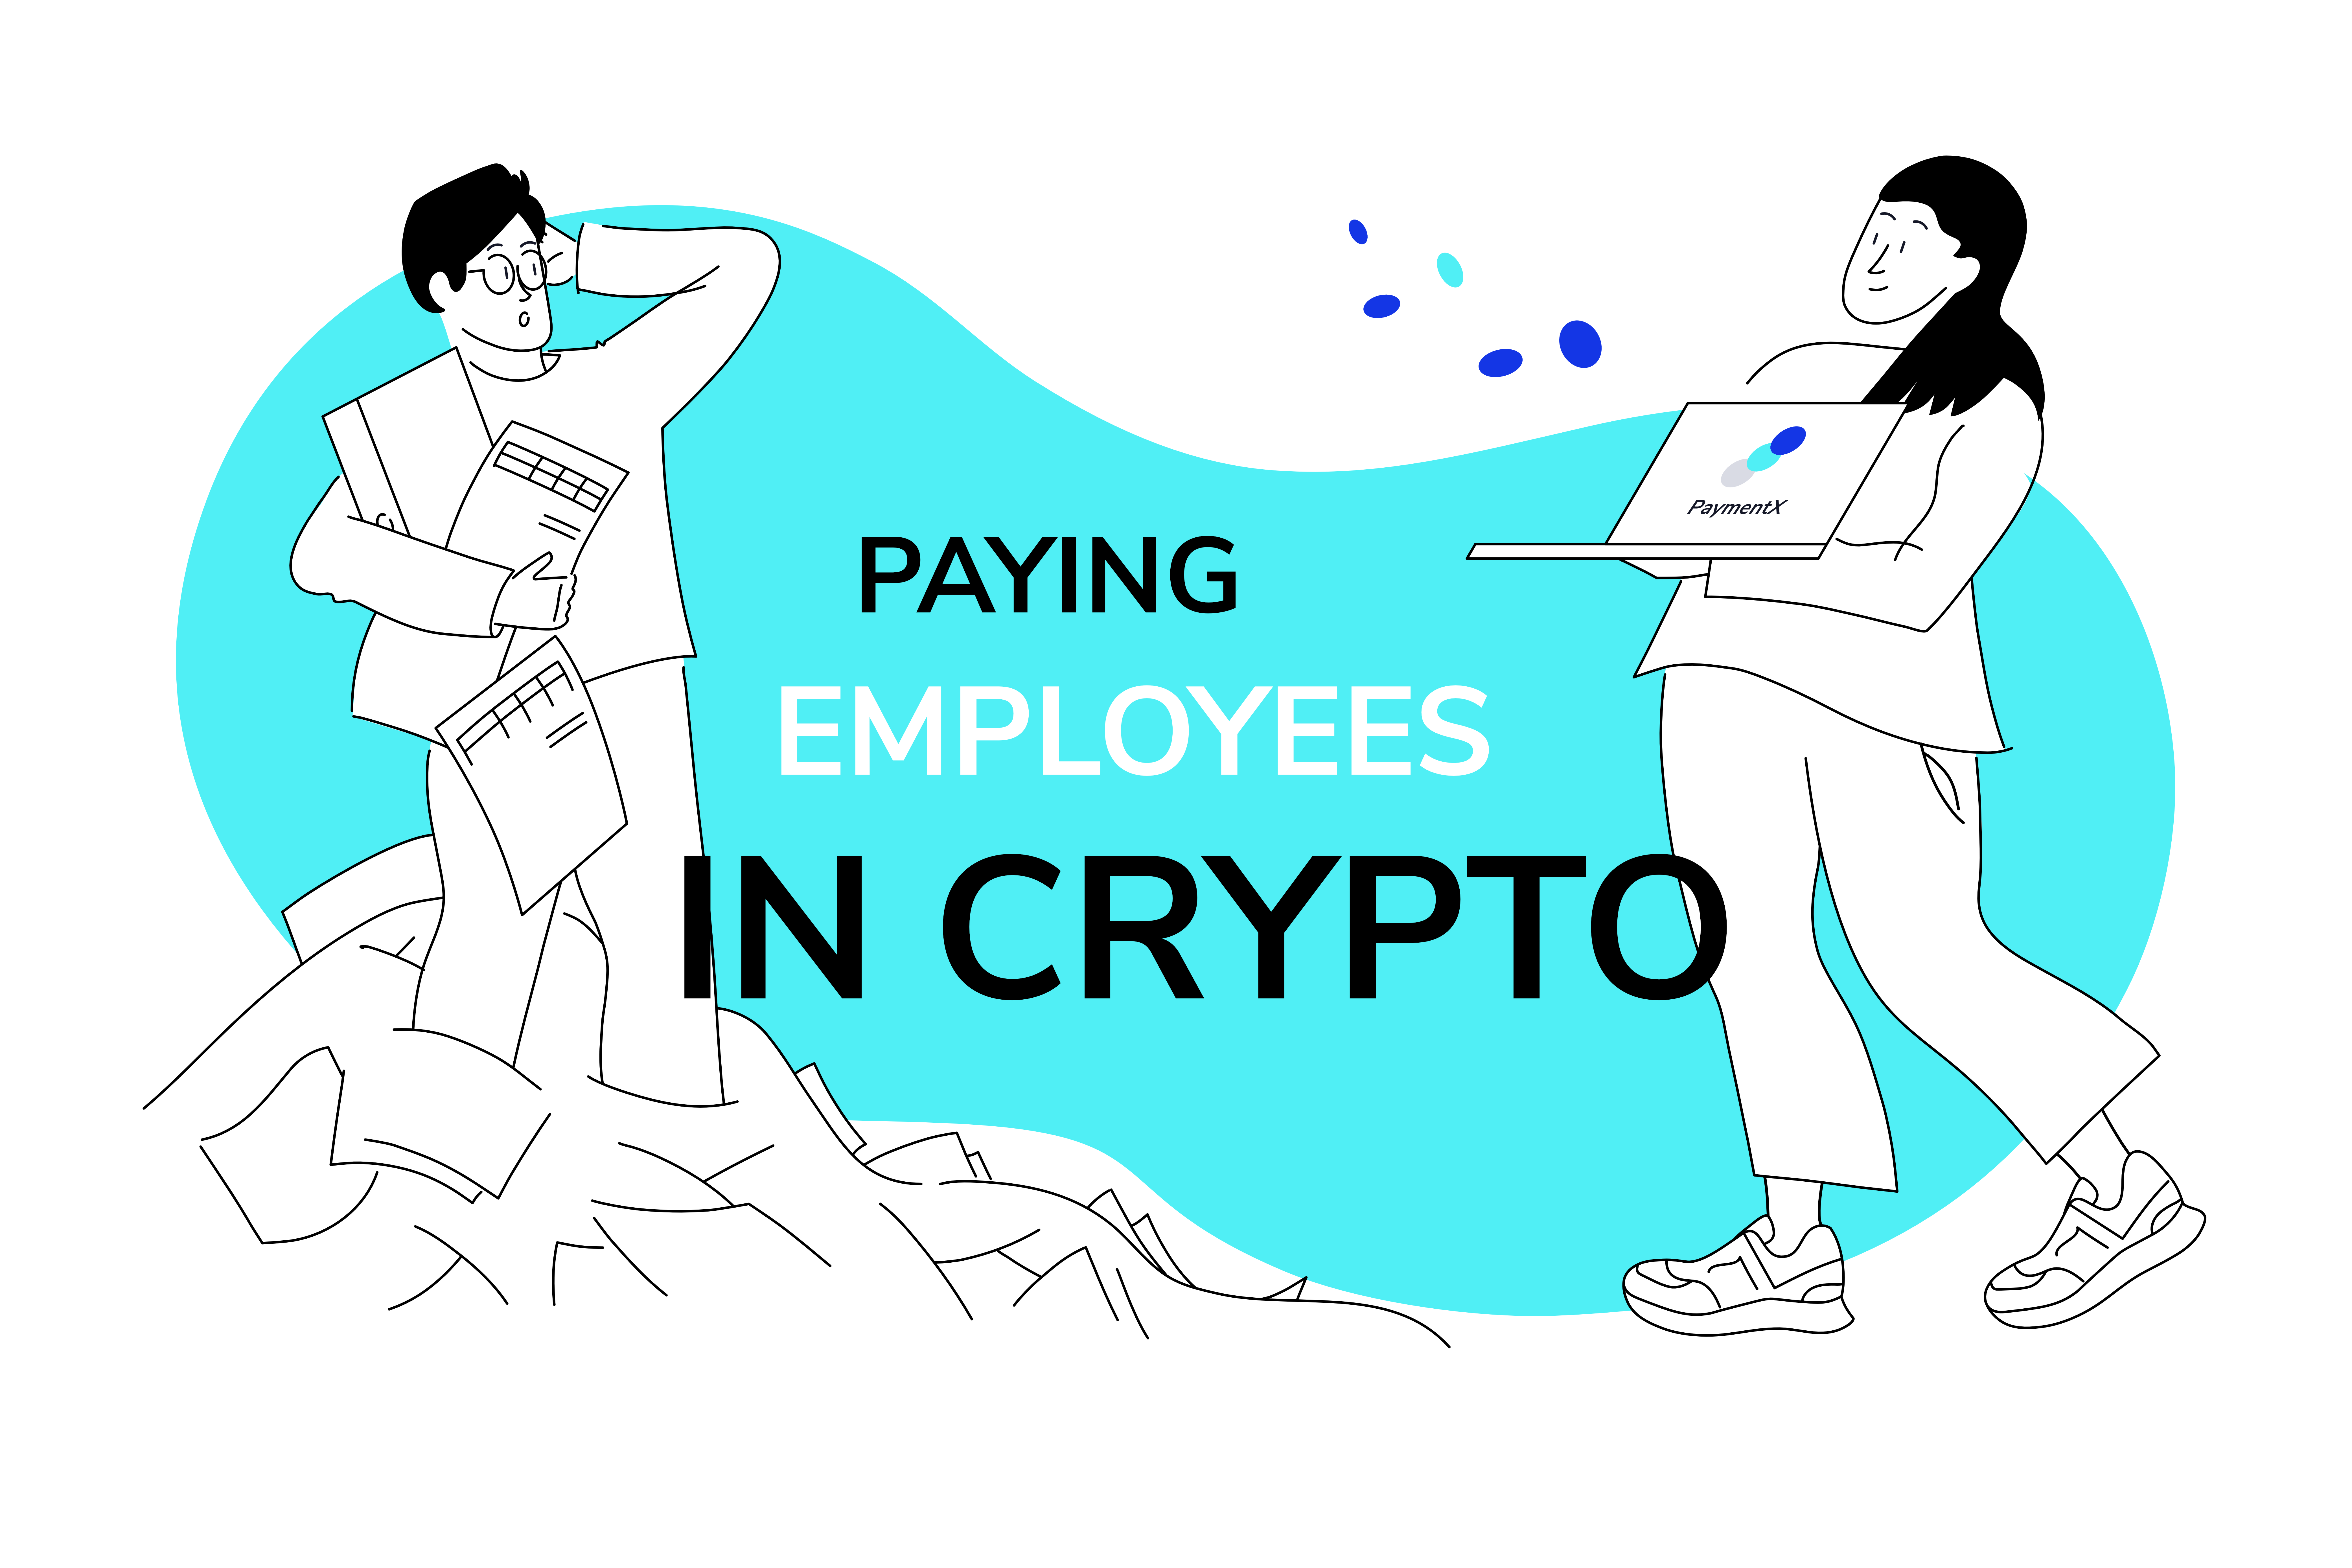 Paying Employees in Cryptocurrency